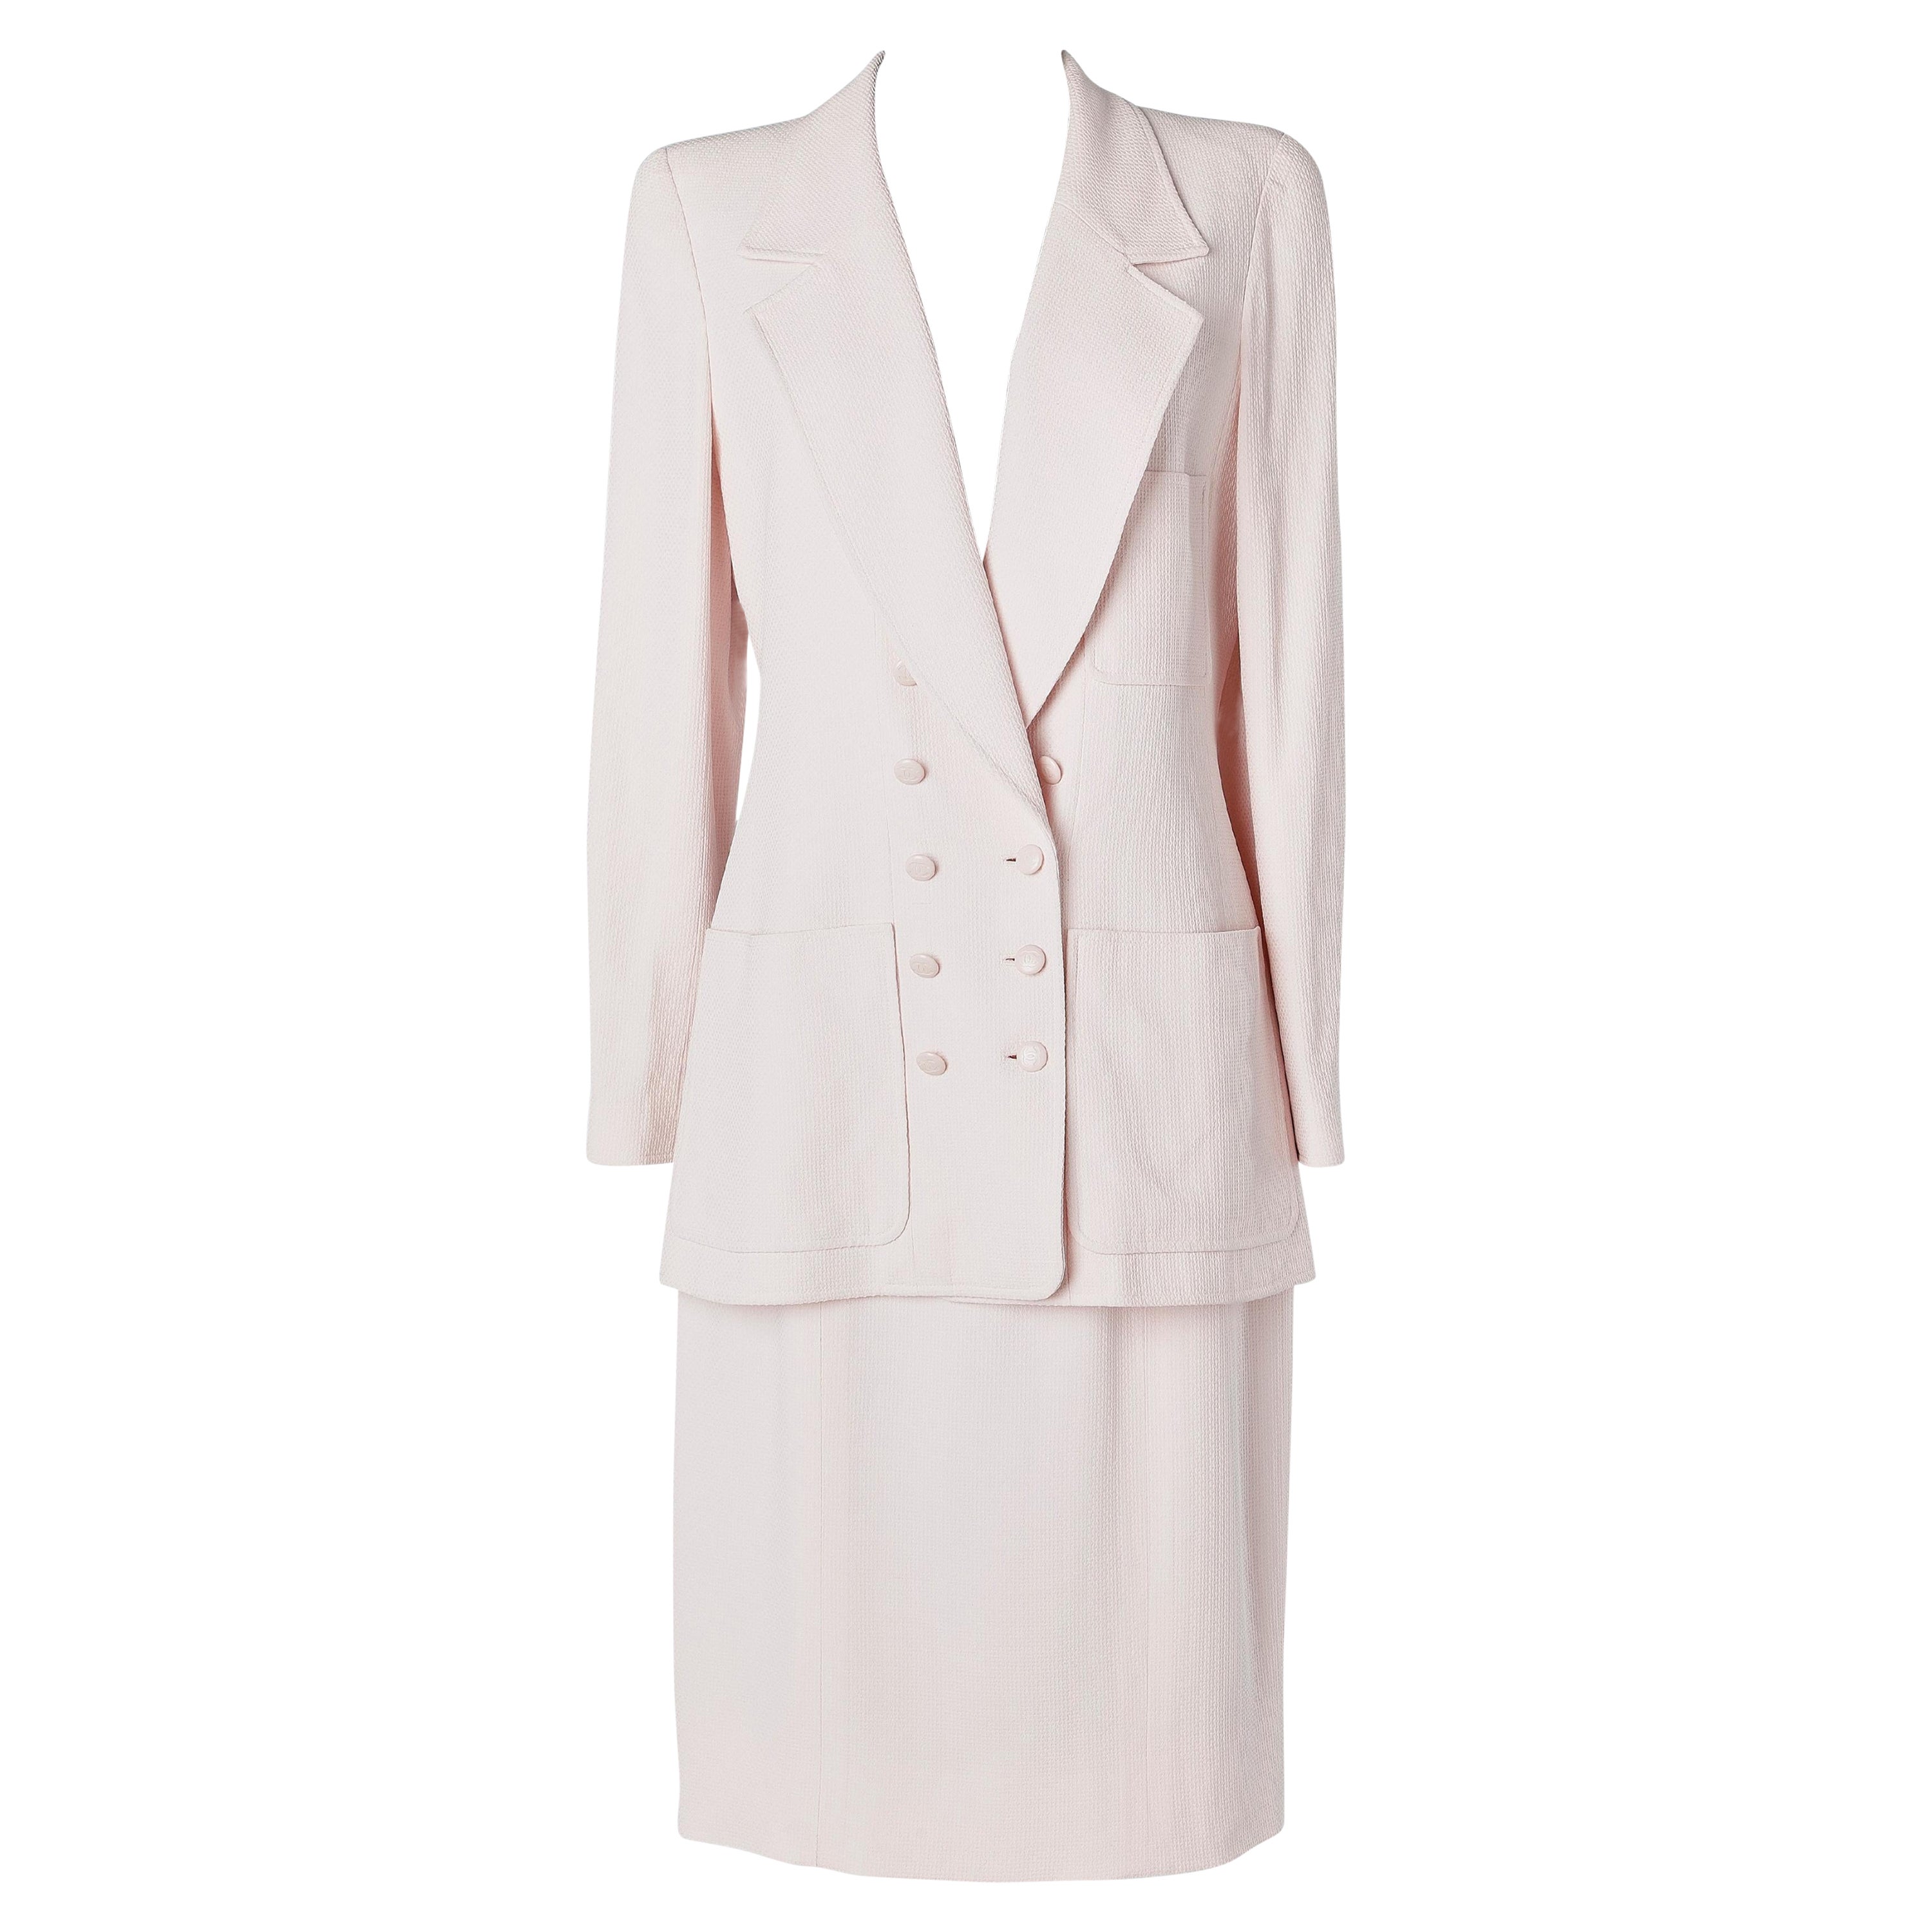 Pale pink double breasted skirt suit For Sale